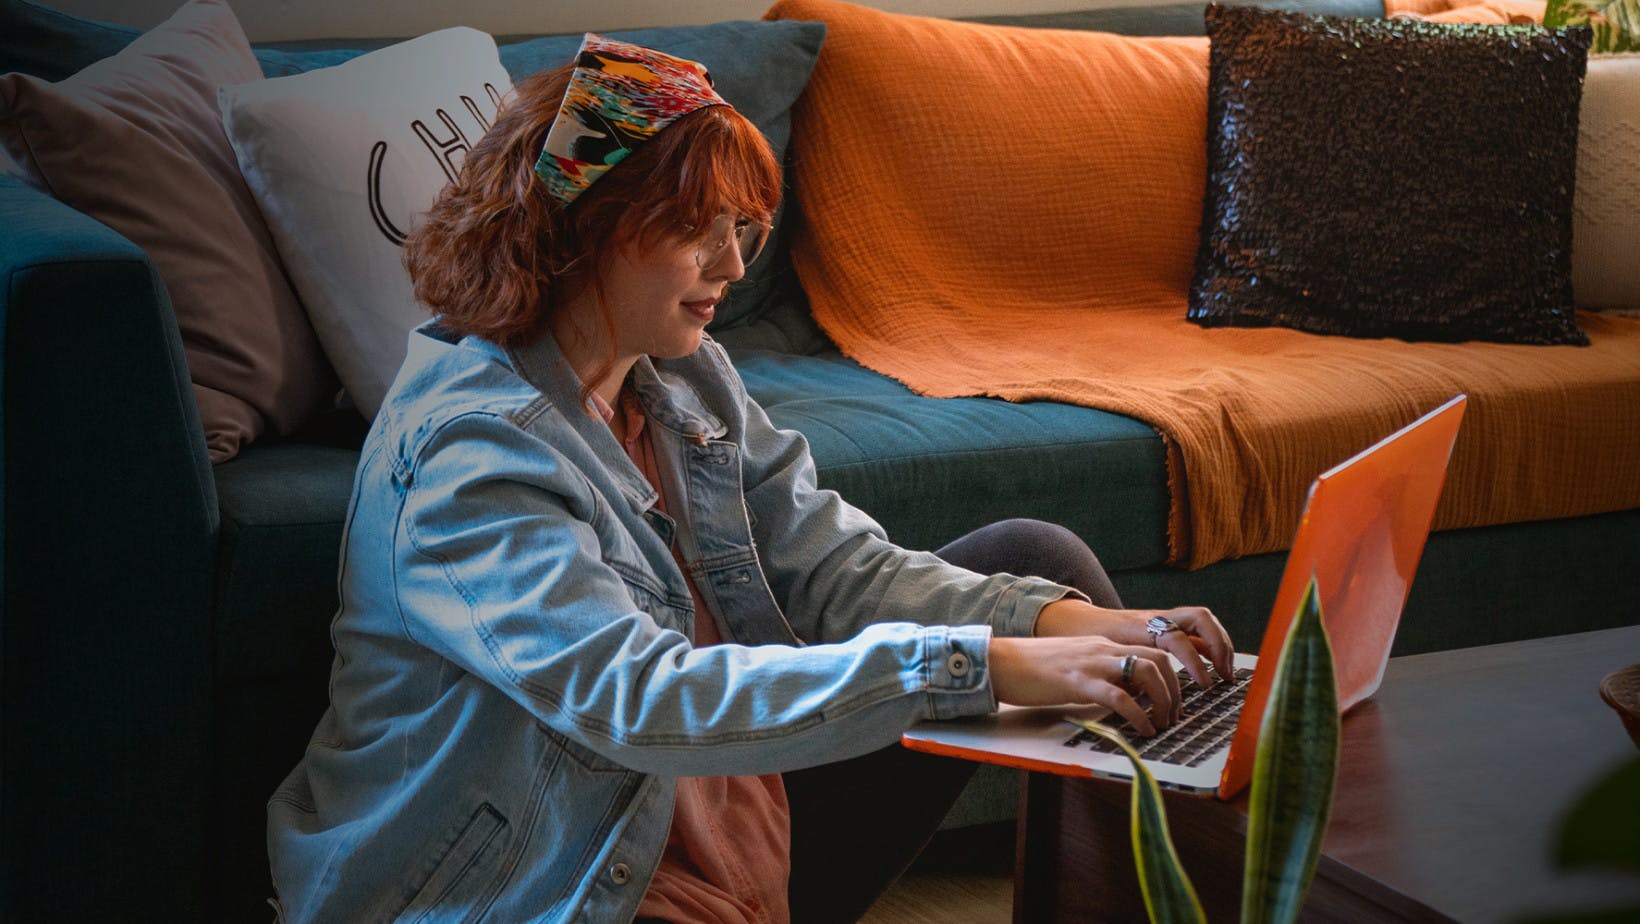 Redhead woman doing college work on her laptop in a living room